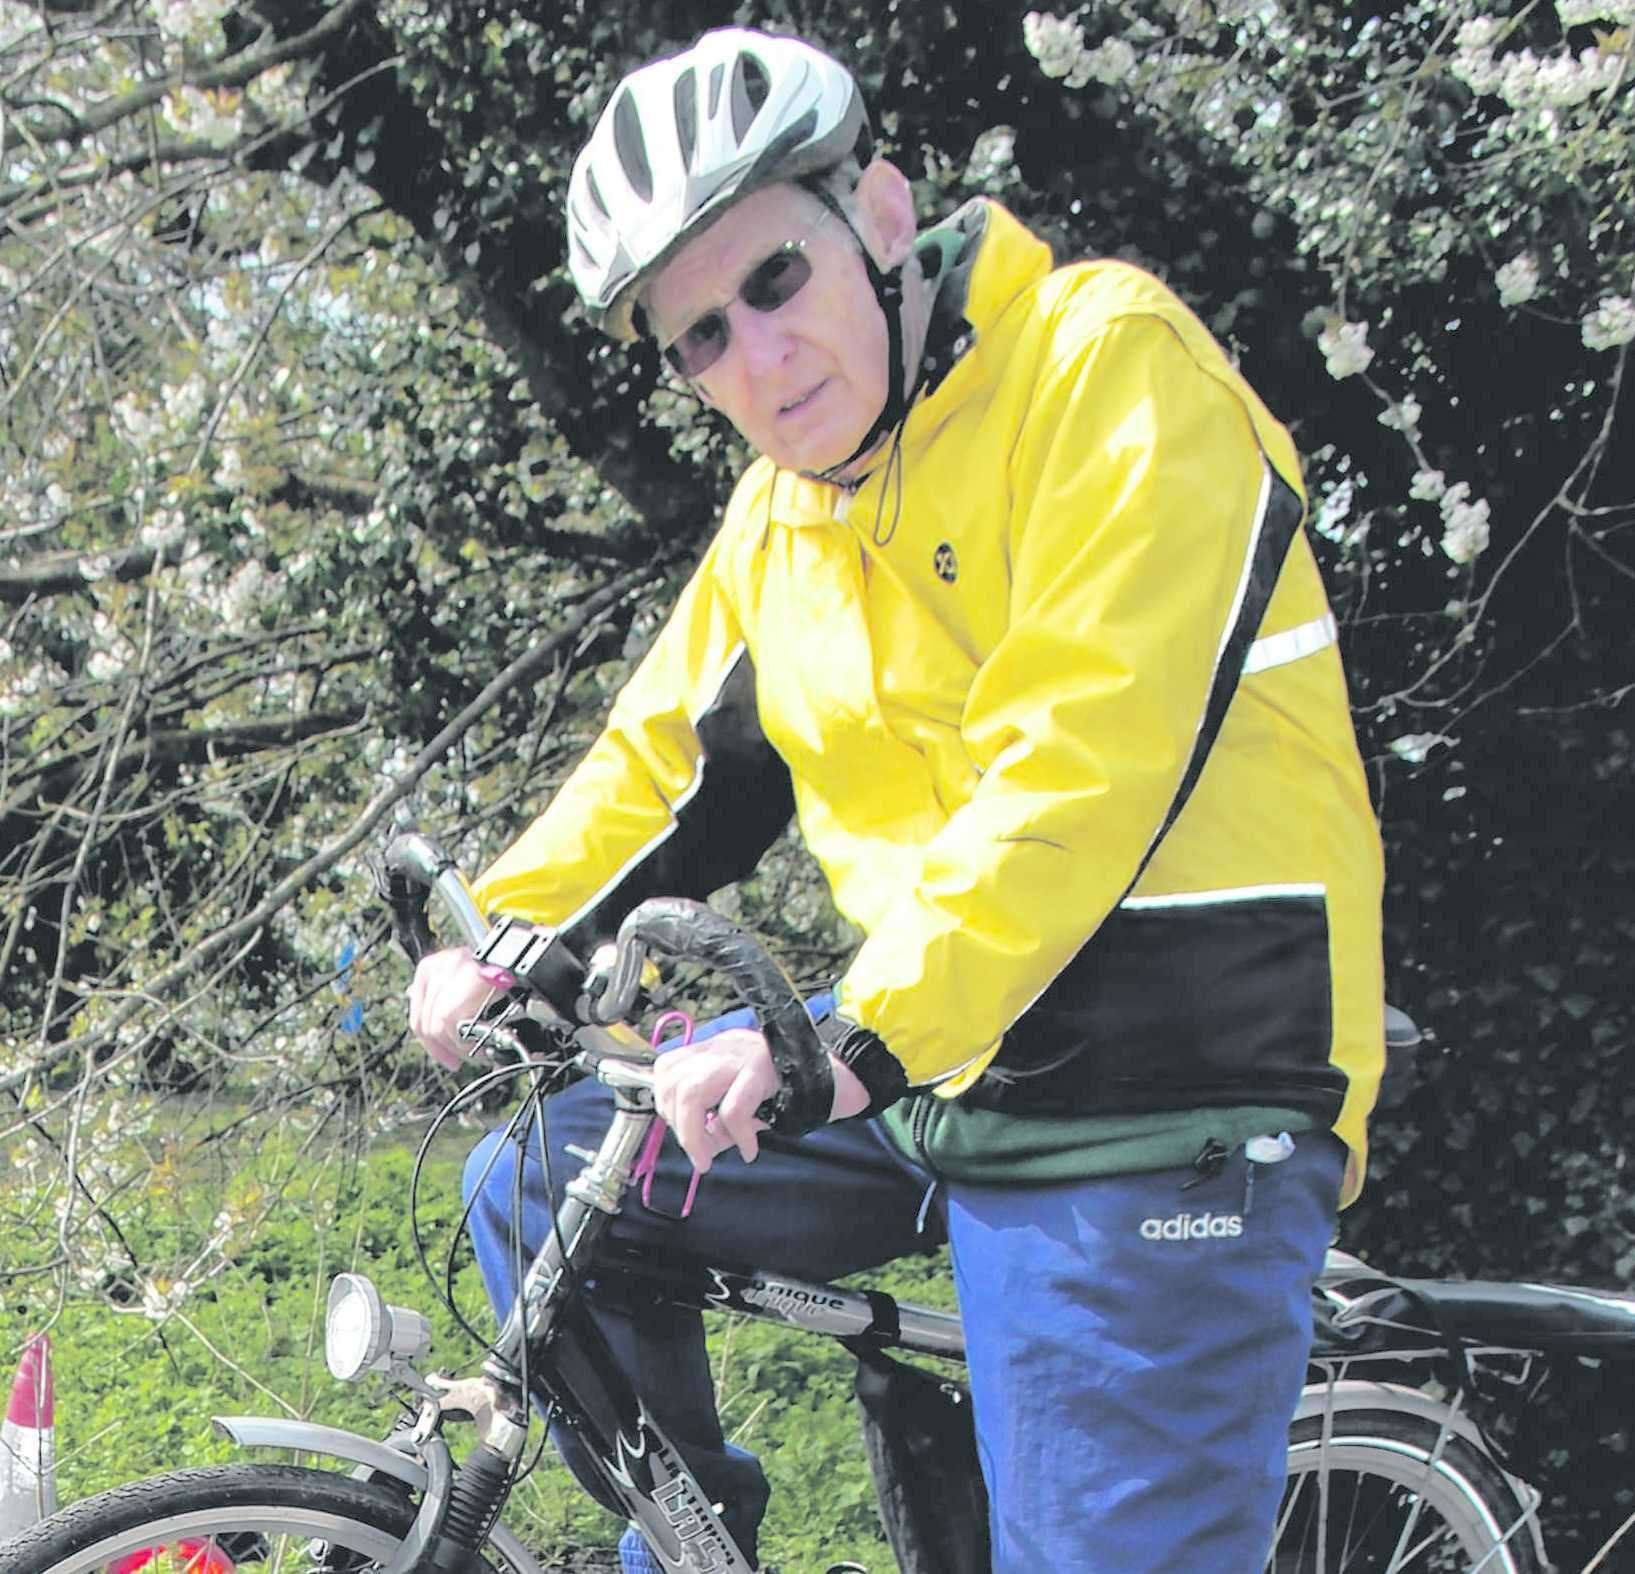 Cyclist Ted Prangnell has shared his concerns over the pedestrian crossings